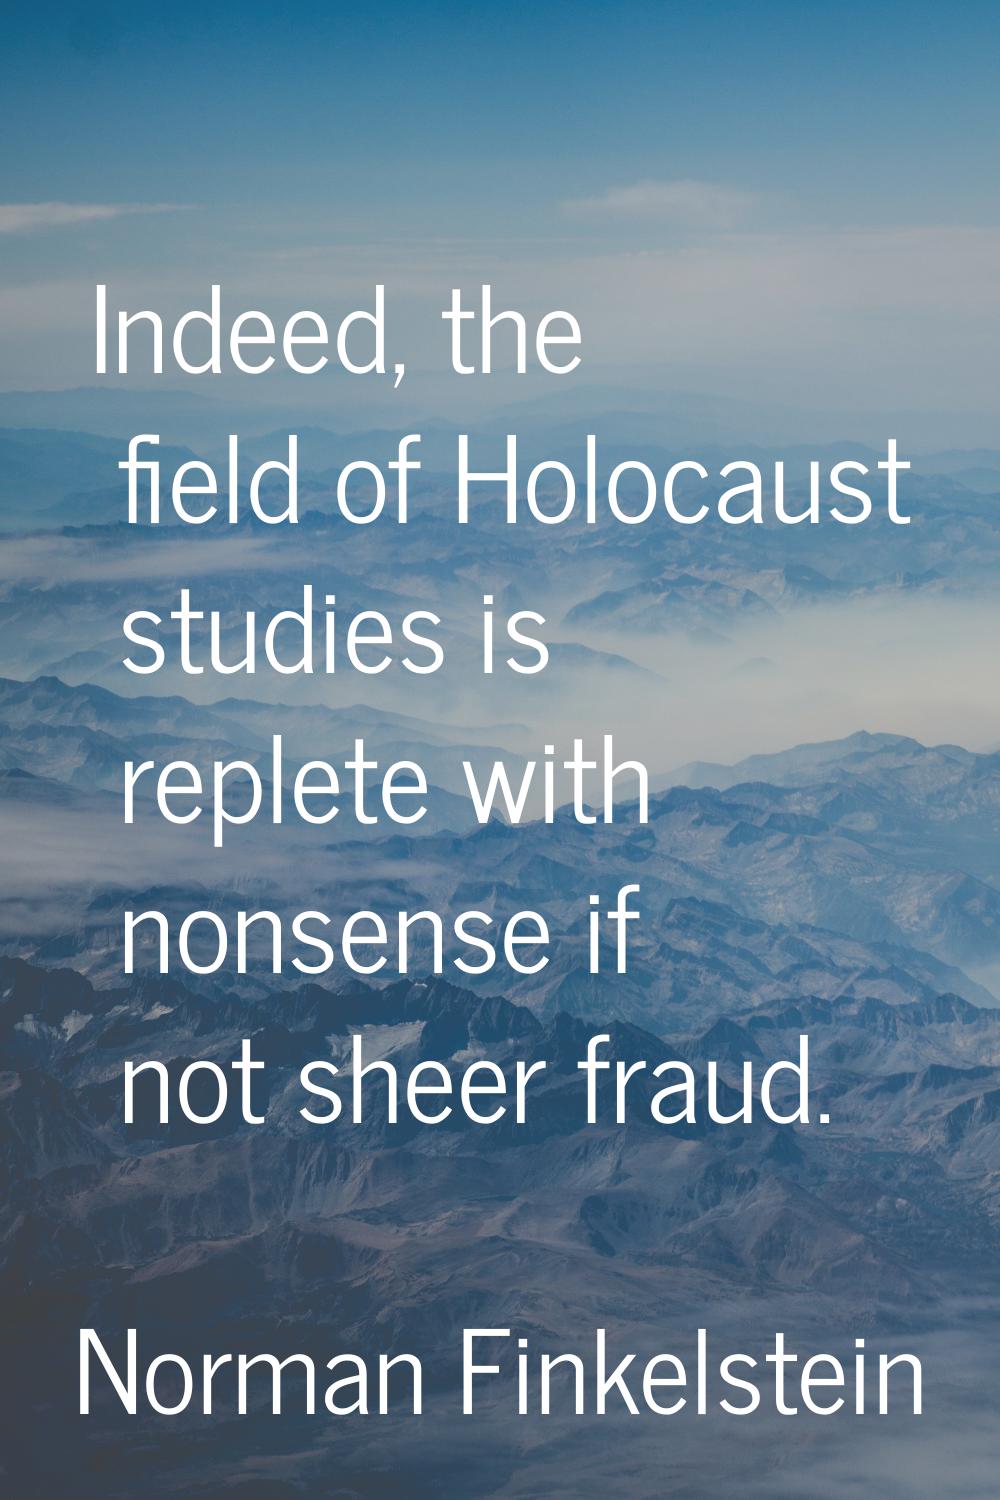 Indeed, the field of Holocaust studies is replete with nonsense if not sheer fraud.